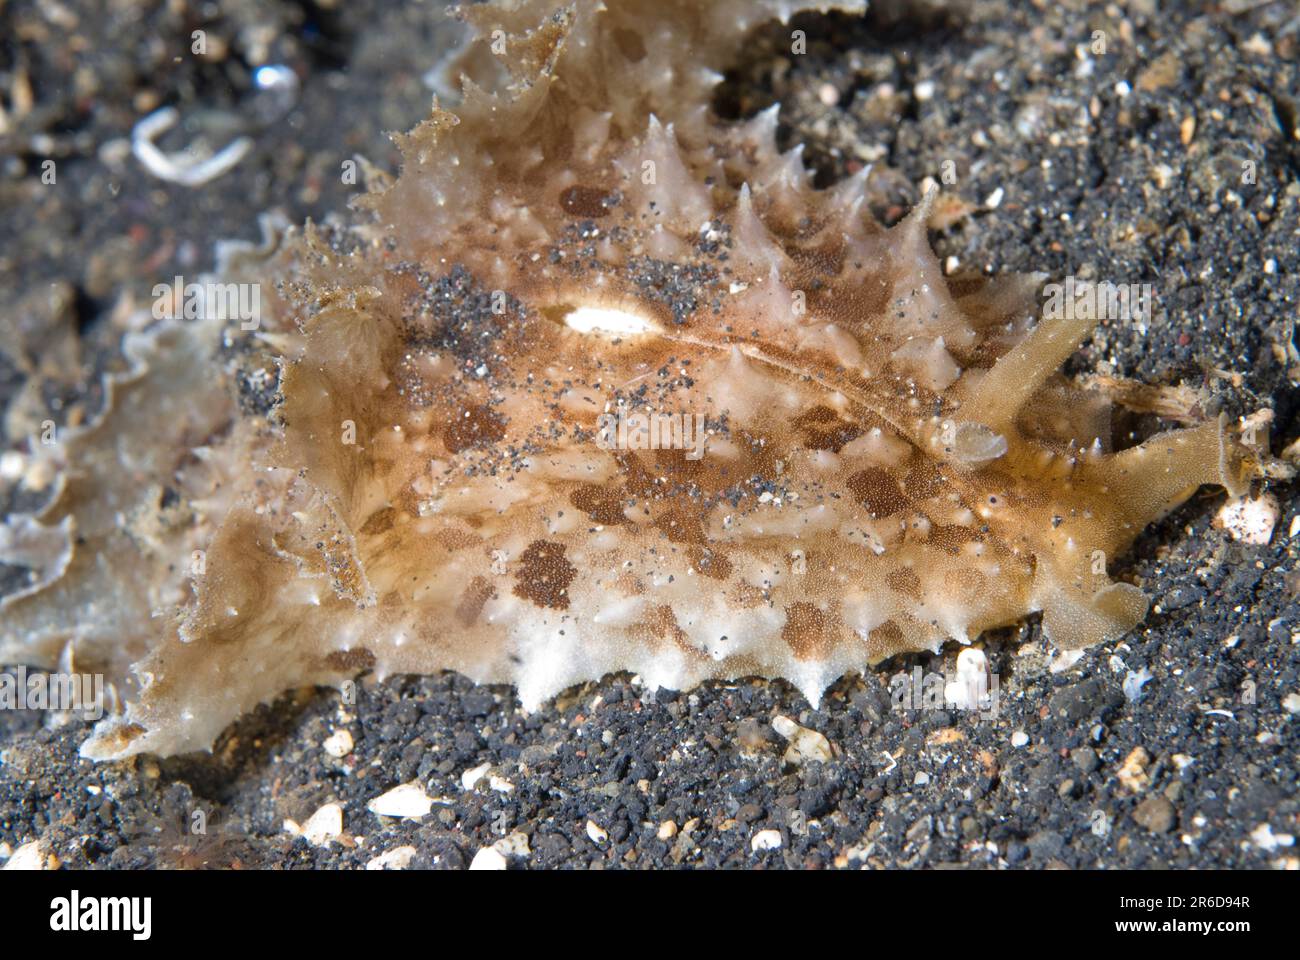 Eared Sea Hare, Dolabella auricularia, on sand, Jahir dive site, Lembeh Straits, Sulawesi, Indonesia Stock Photo